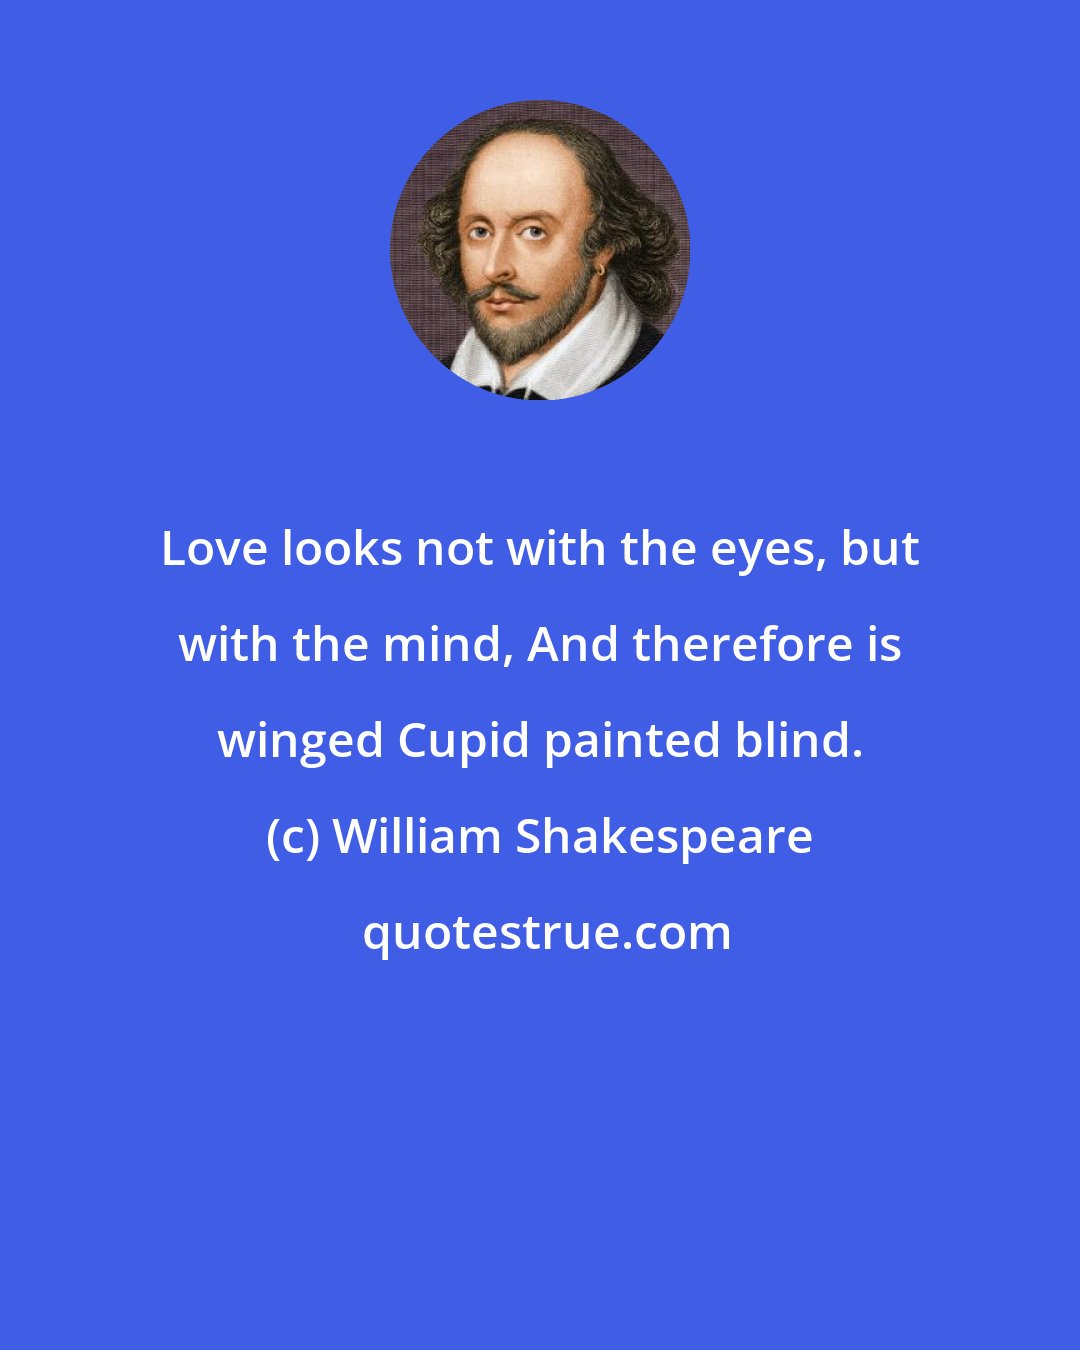 William Shakespeare: Love looks not with the eyes, but with the mind, And therefore is winged Cupid painted blind.